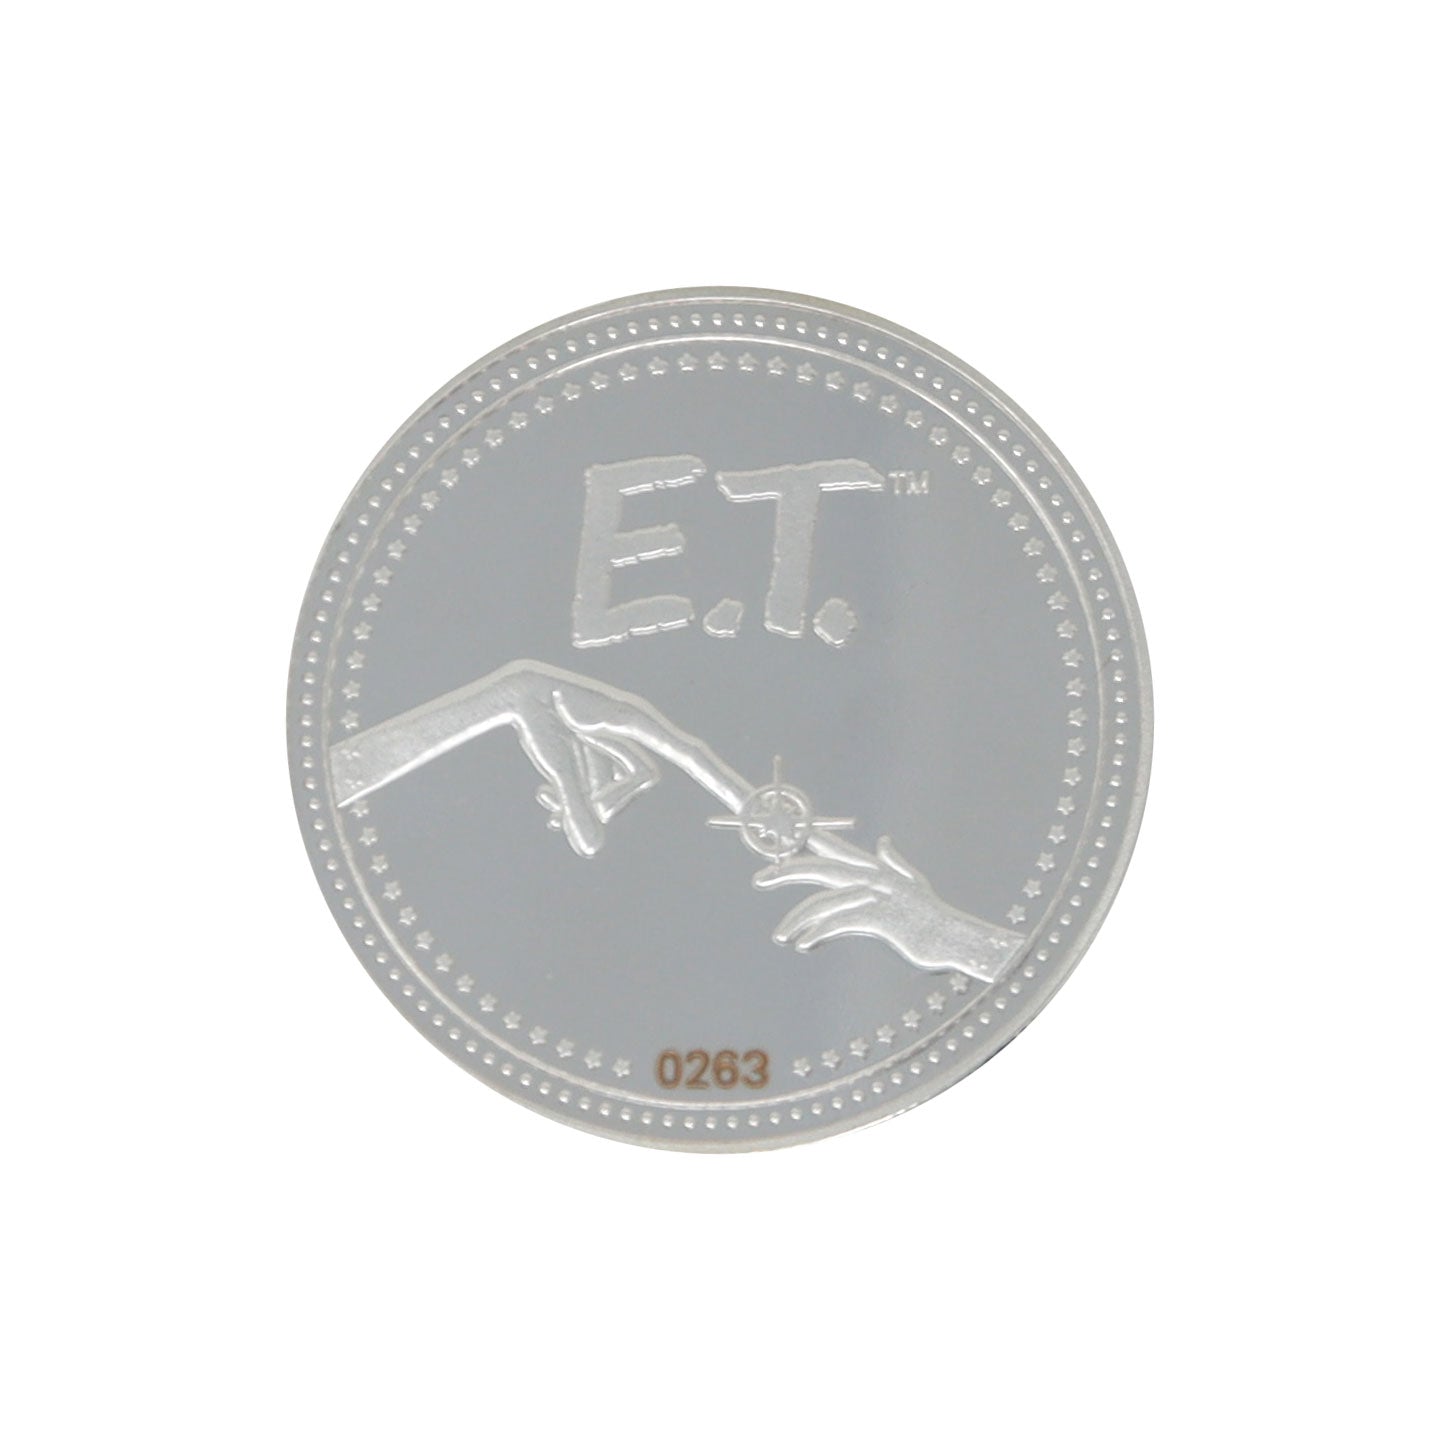 E.T. Limited Edition Collectible Coin